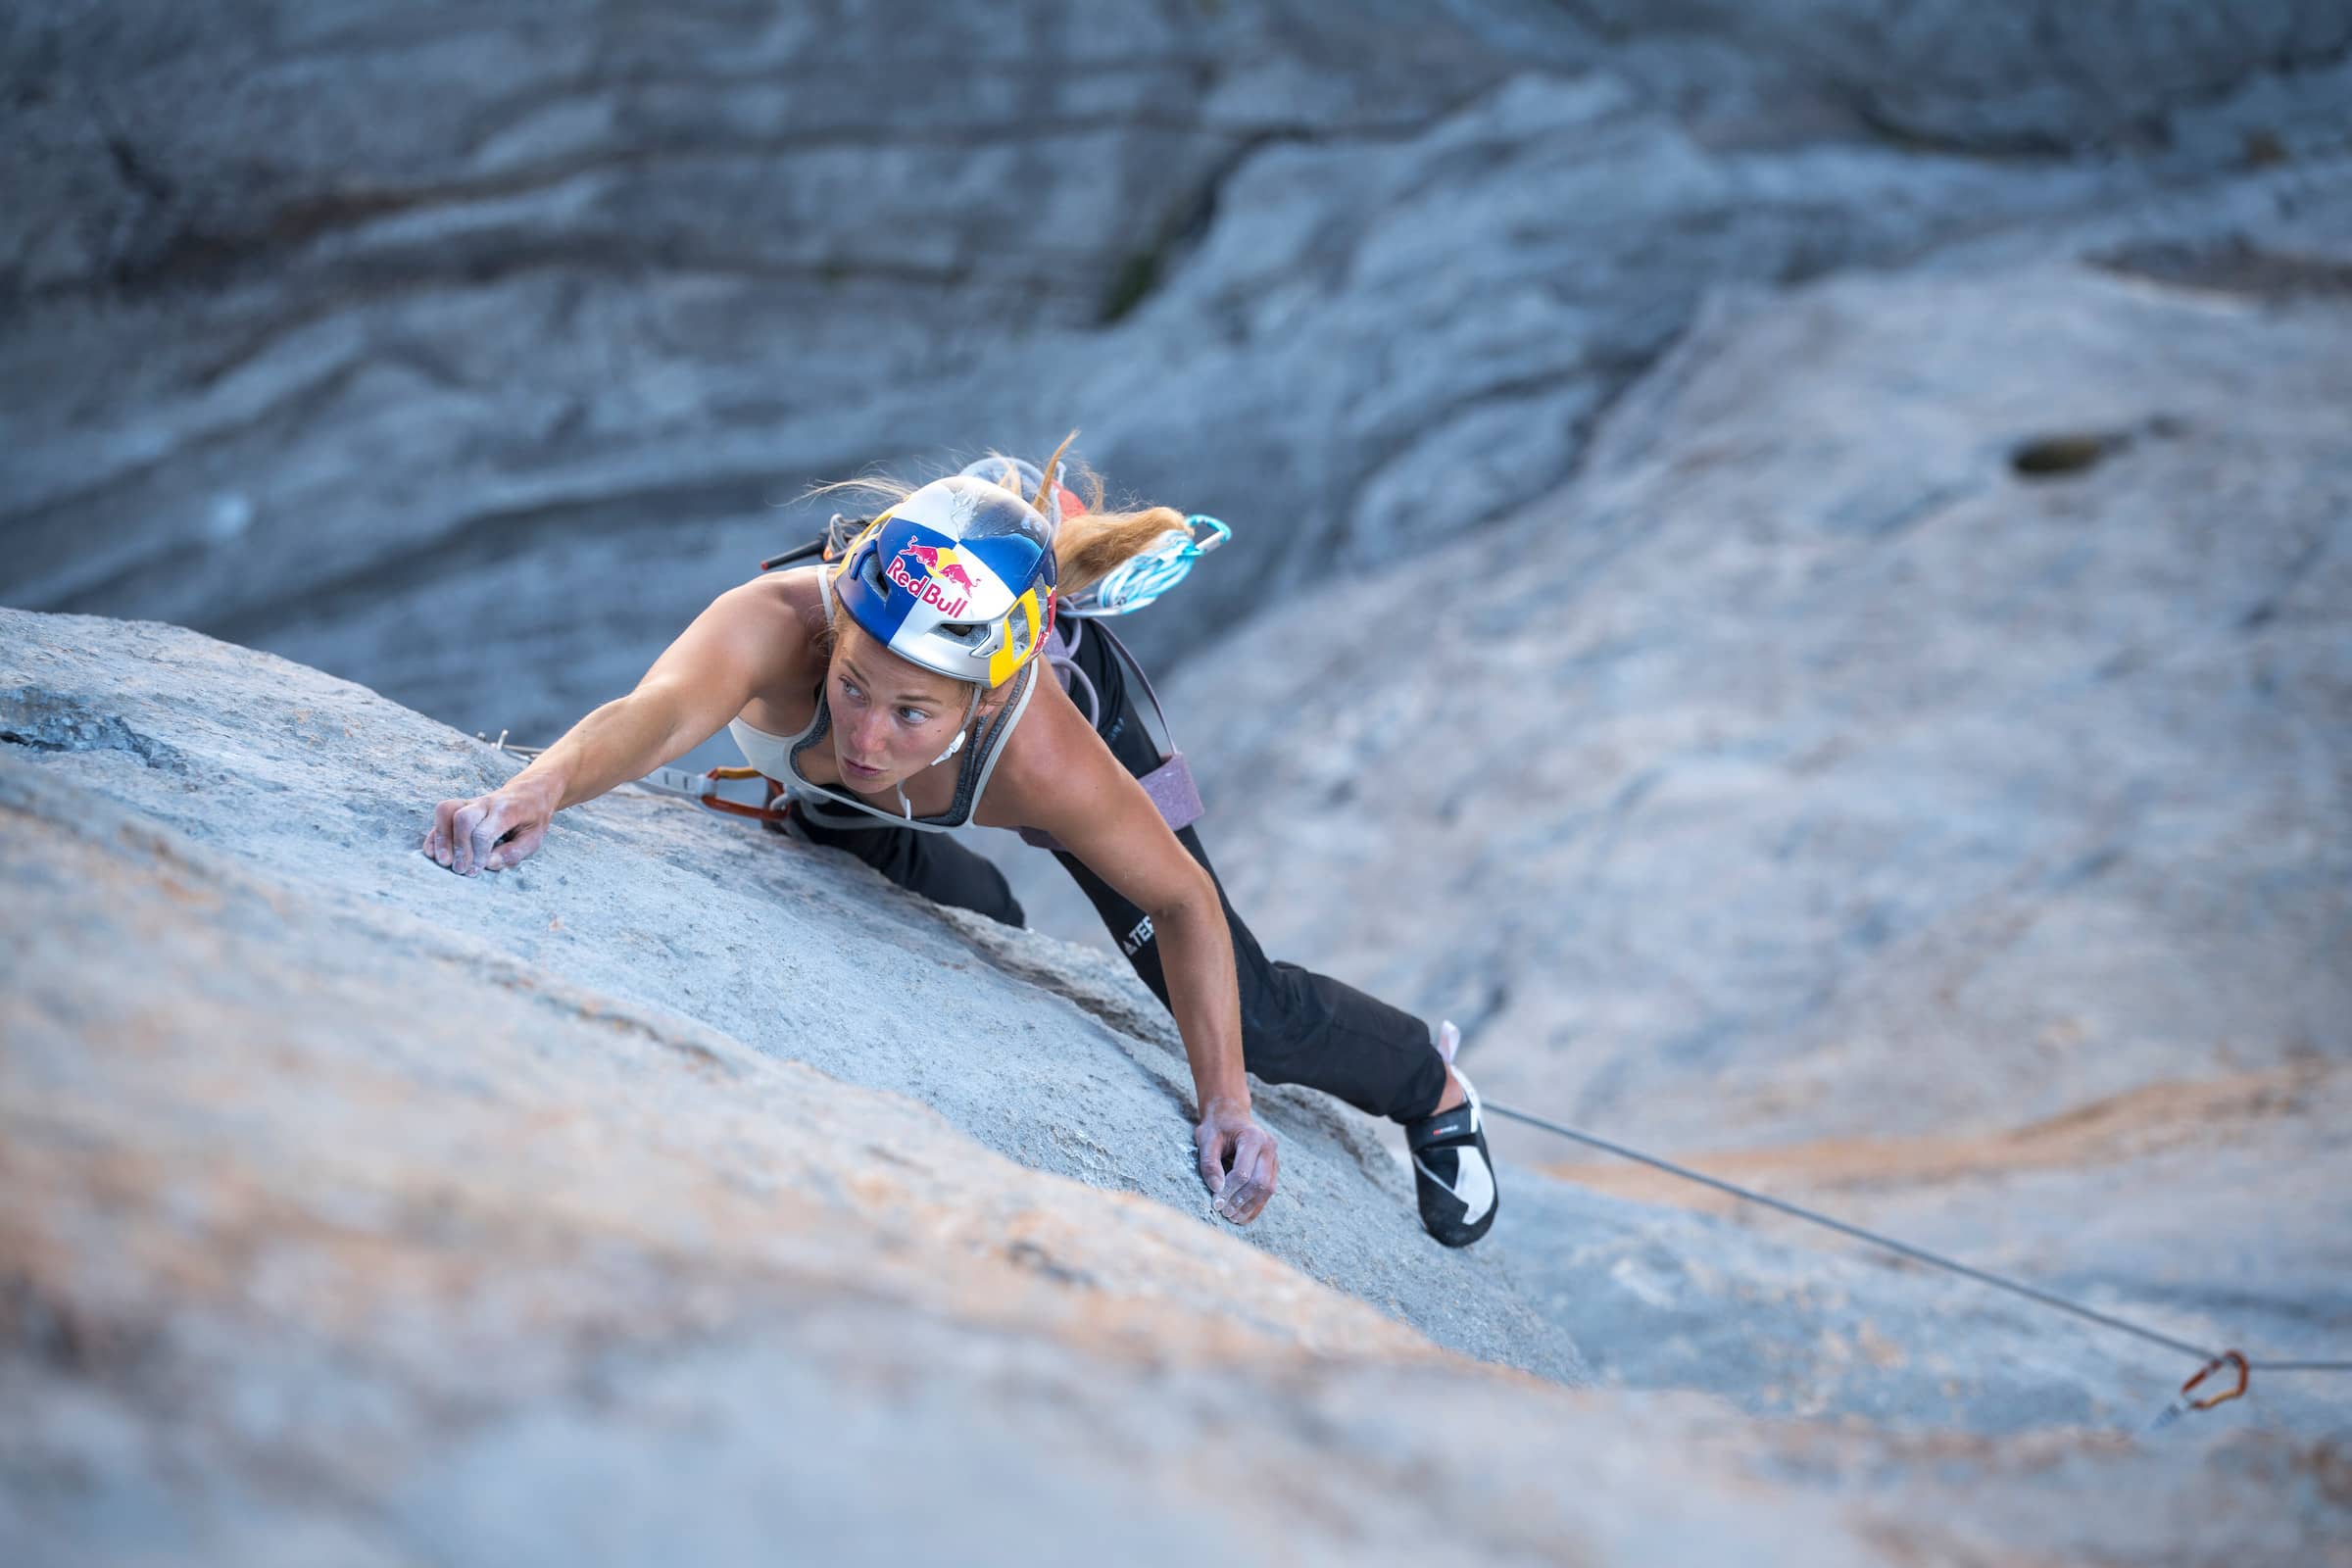 Sasha digiulian heads first all-female team to scale imposing rayu route